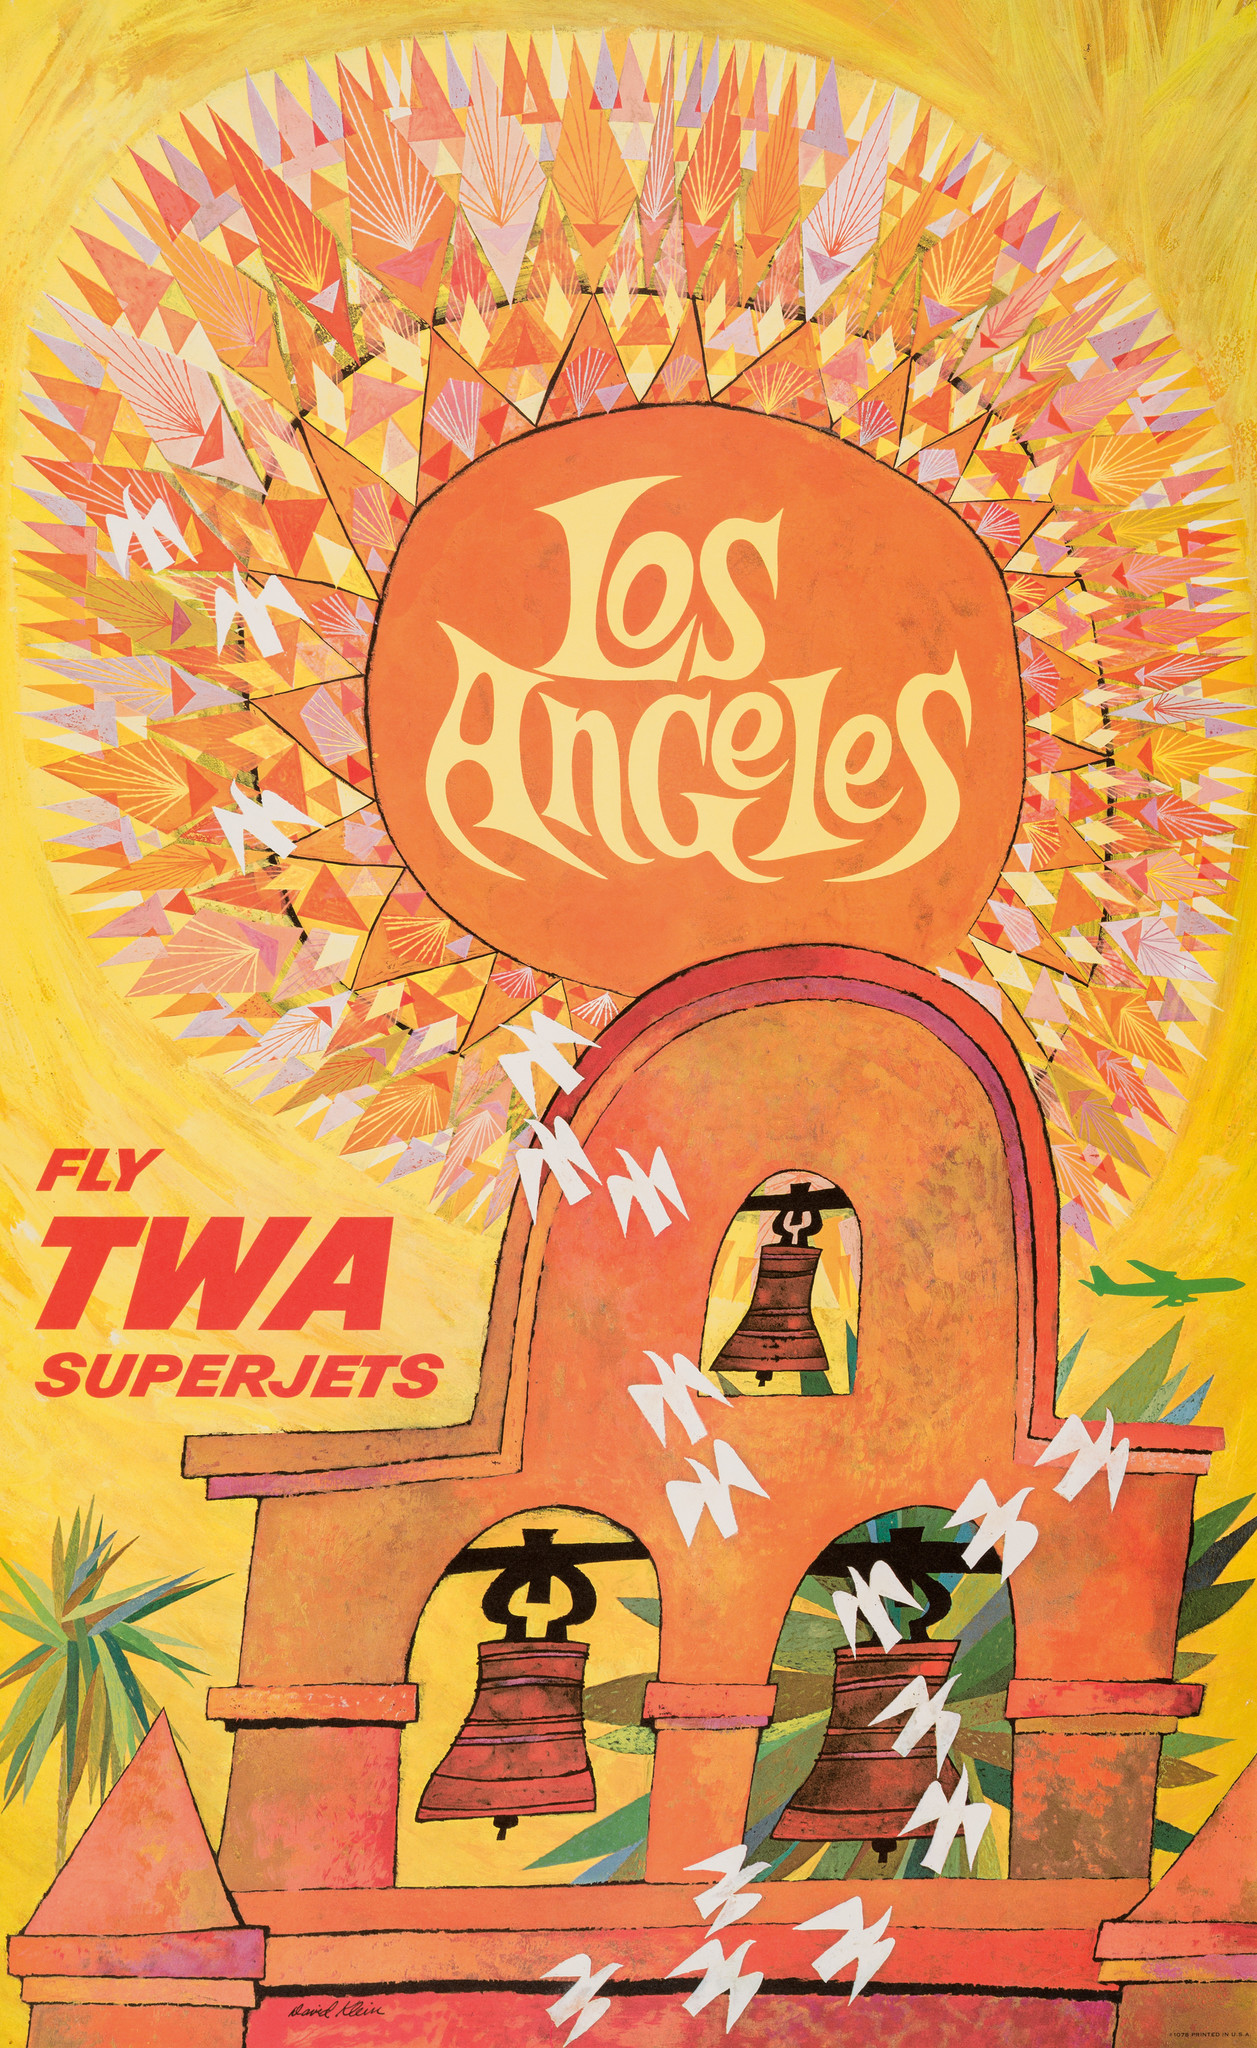 A 1960s poster for TWA by David Klein, in "Found in Translation" at LACMA.